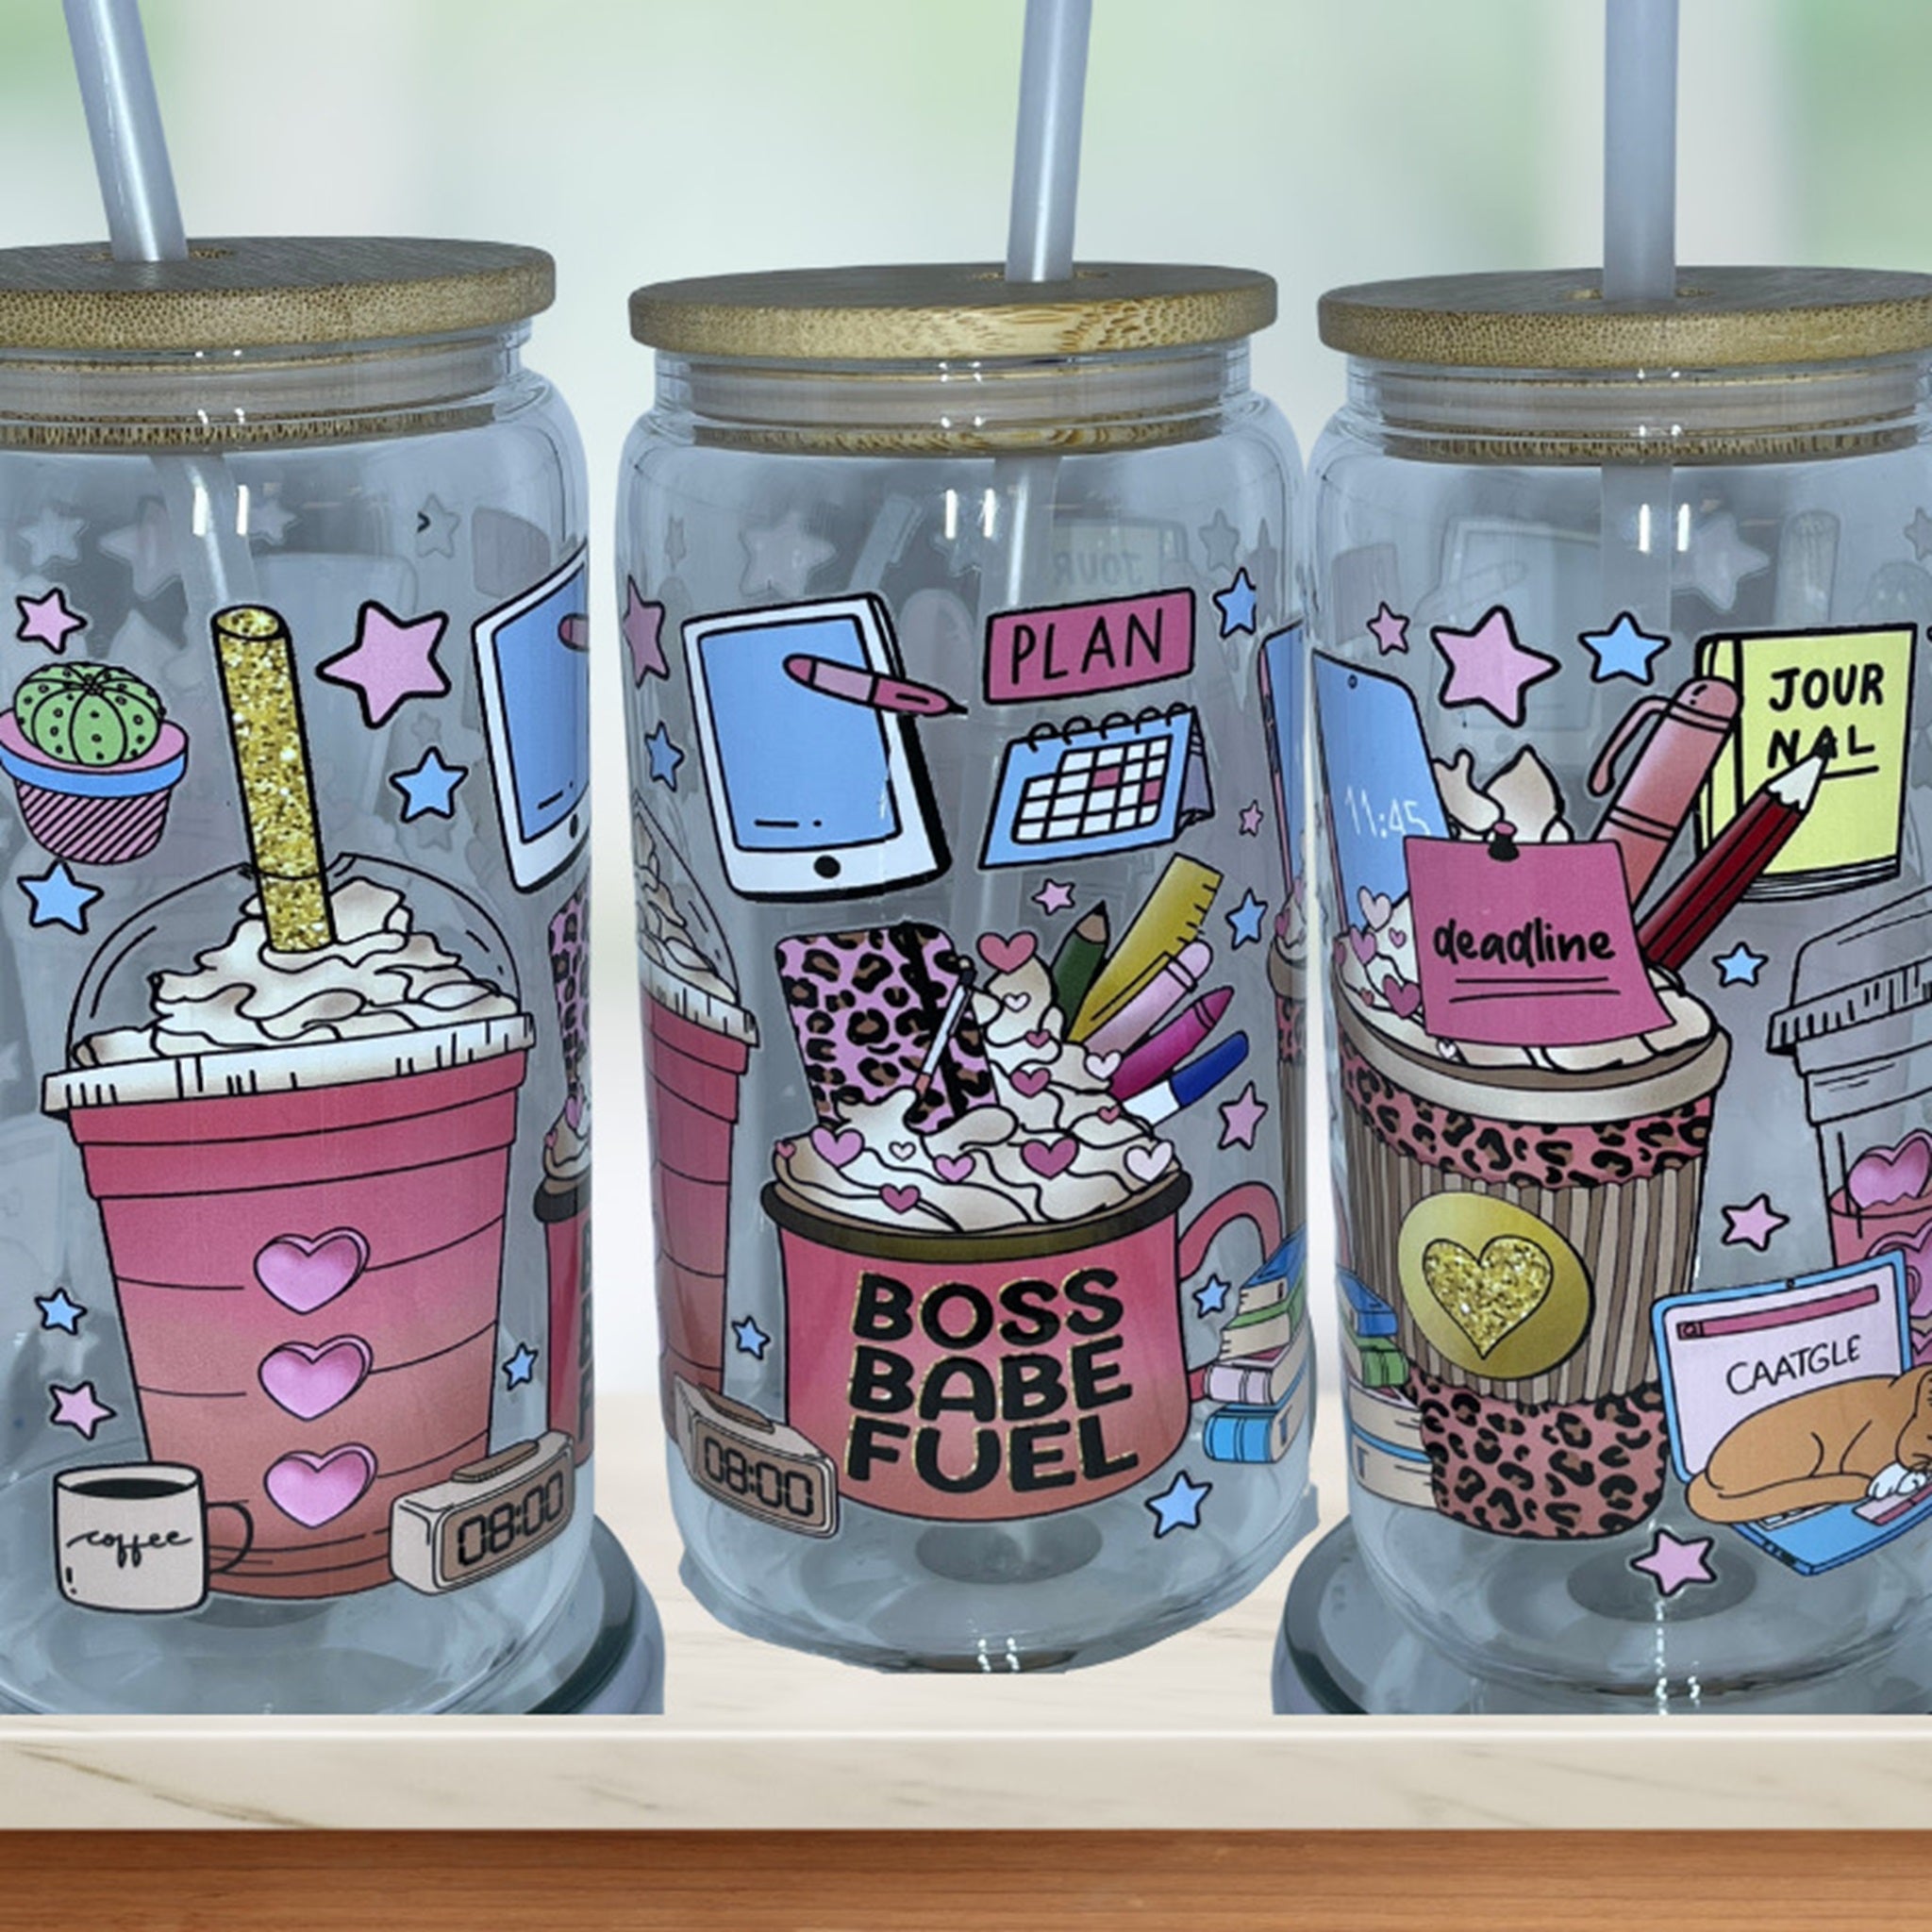 Boss Babe Fuel Cup